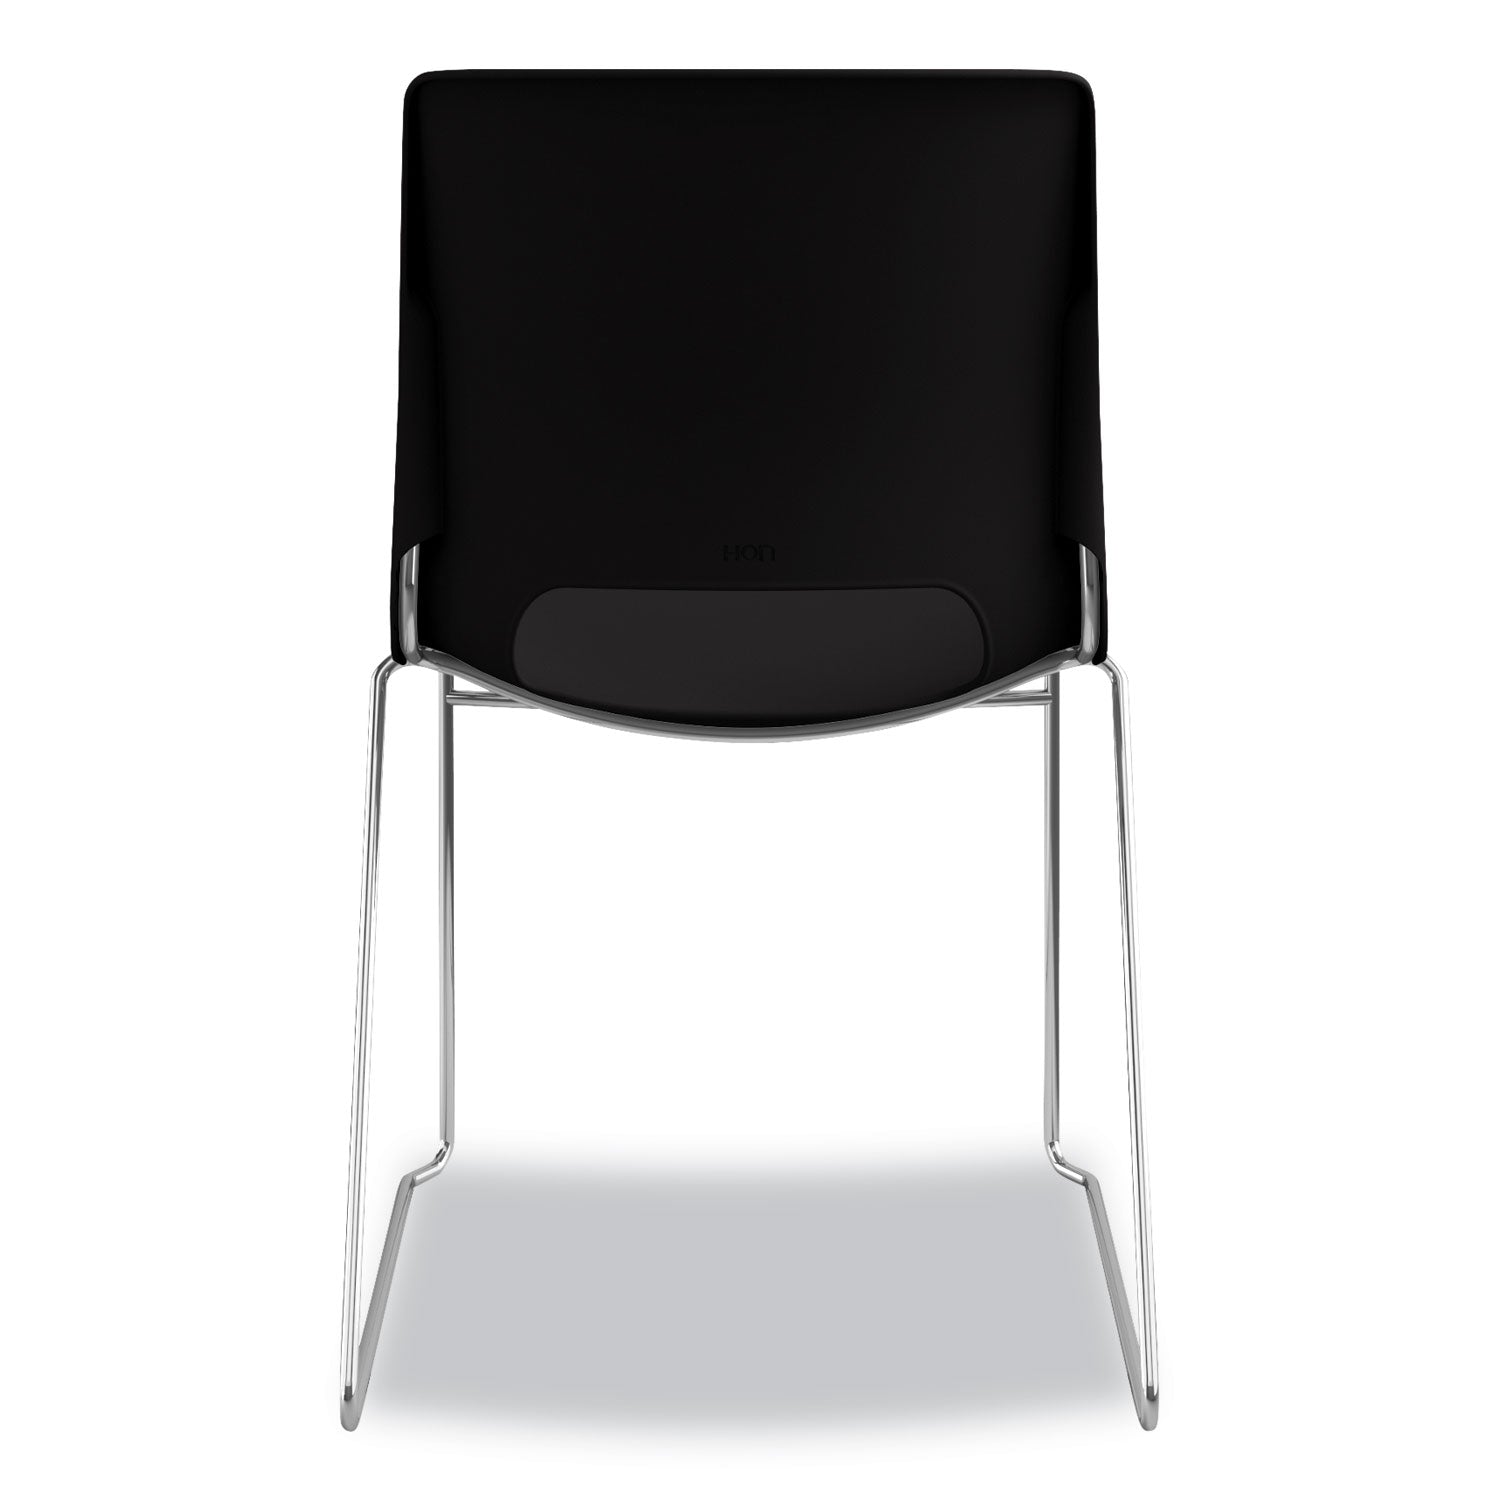 Motivate High-Density Stacking Chair, Supports Up to 300 lb, 17.75" Seat Height, Onyx Seat, Black Back, Chrome Base, 4/Carton - 